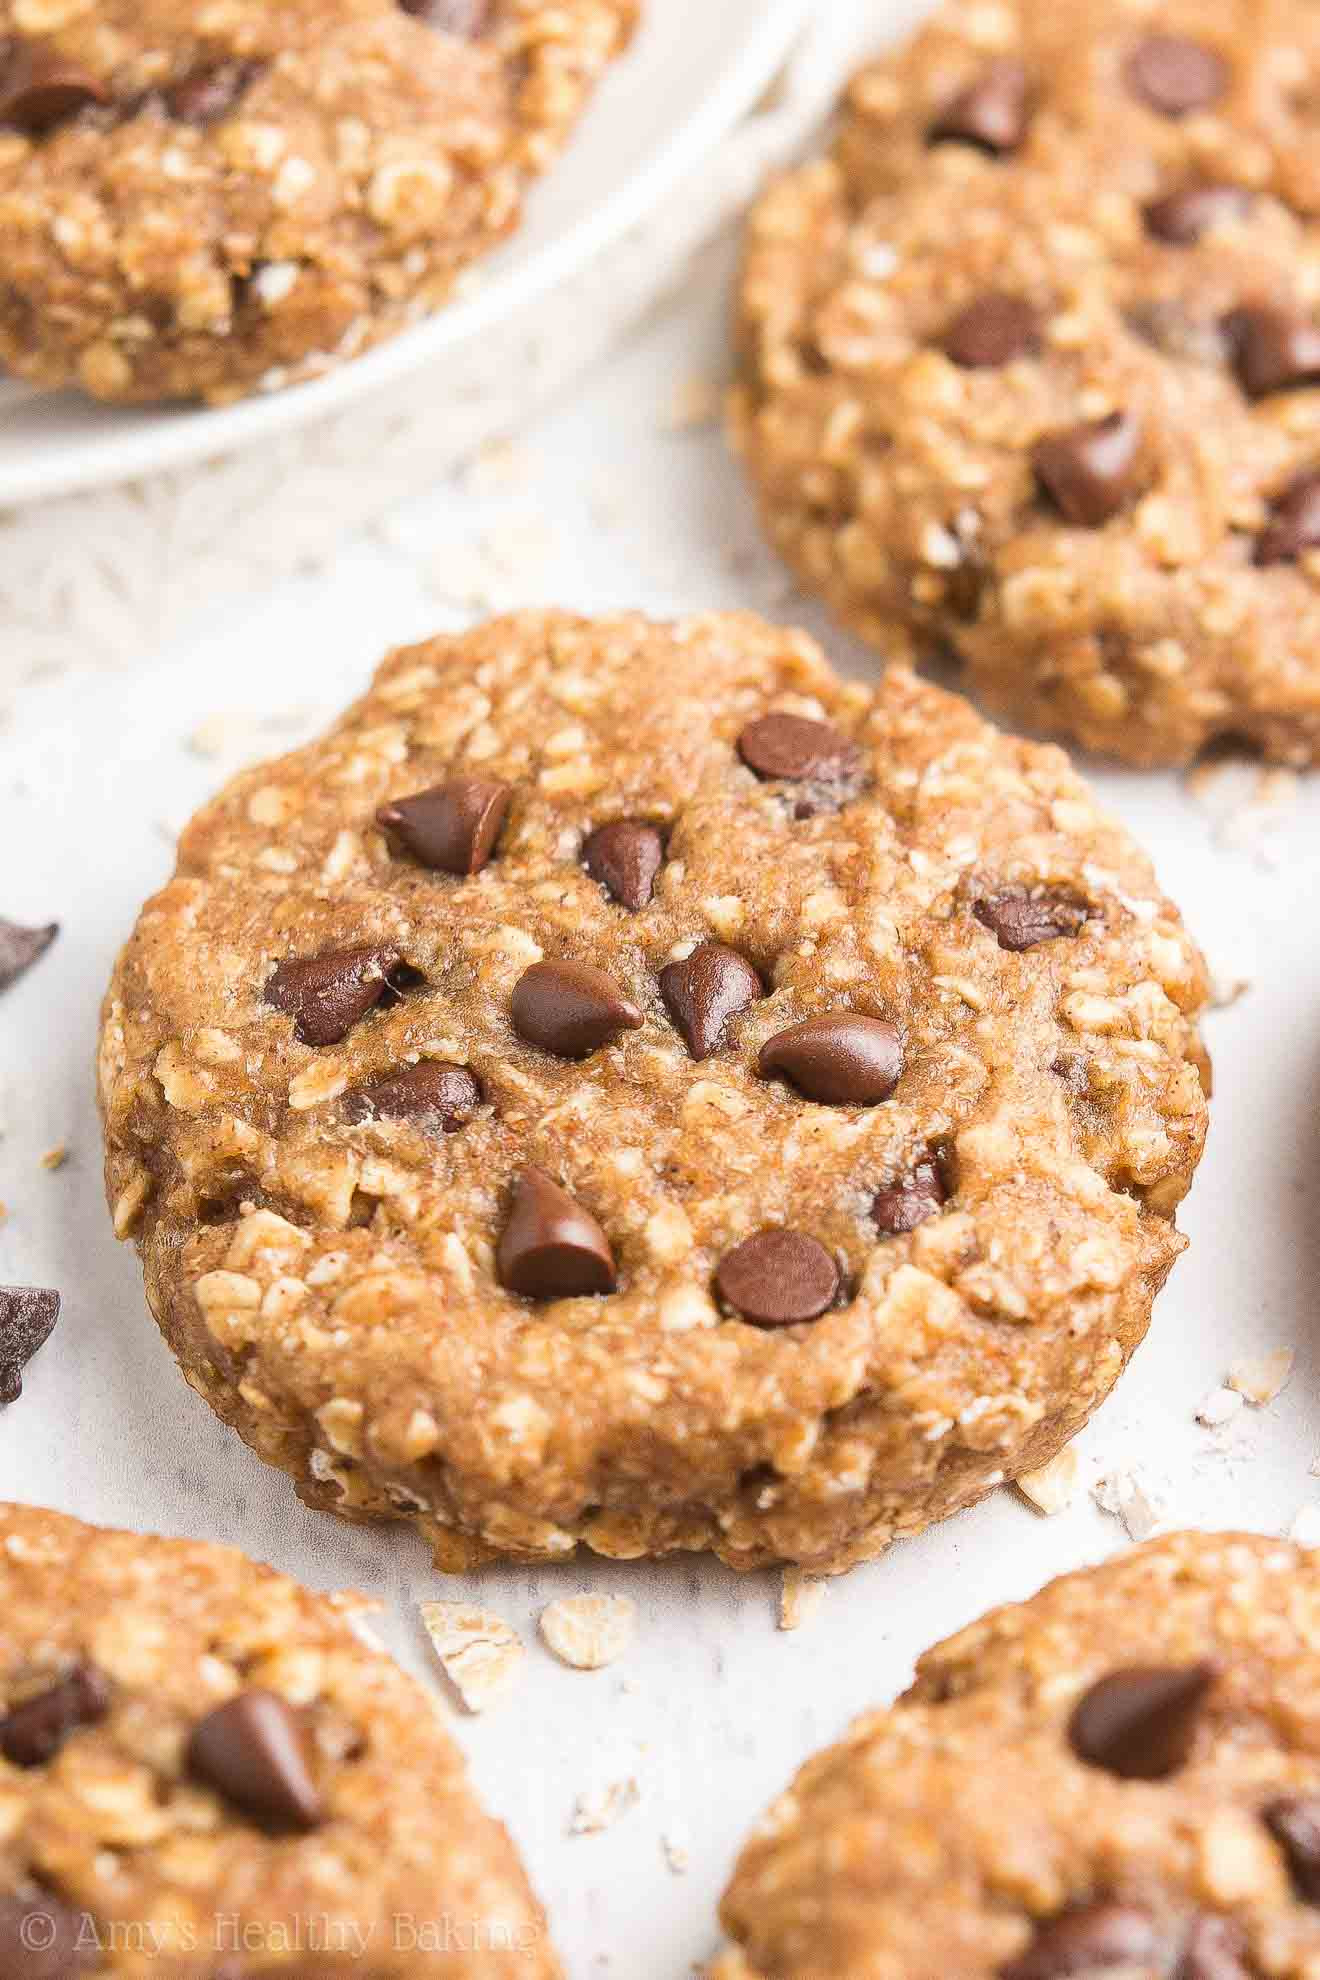 Peanut Butter Oatmeal Cookies Healthy
 healthy peanut butter oatmeal cookies